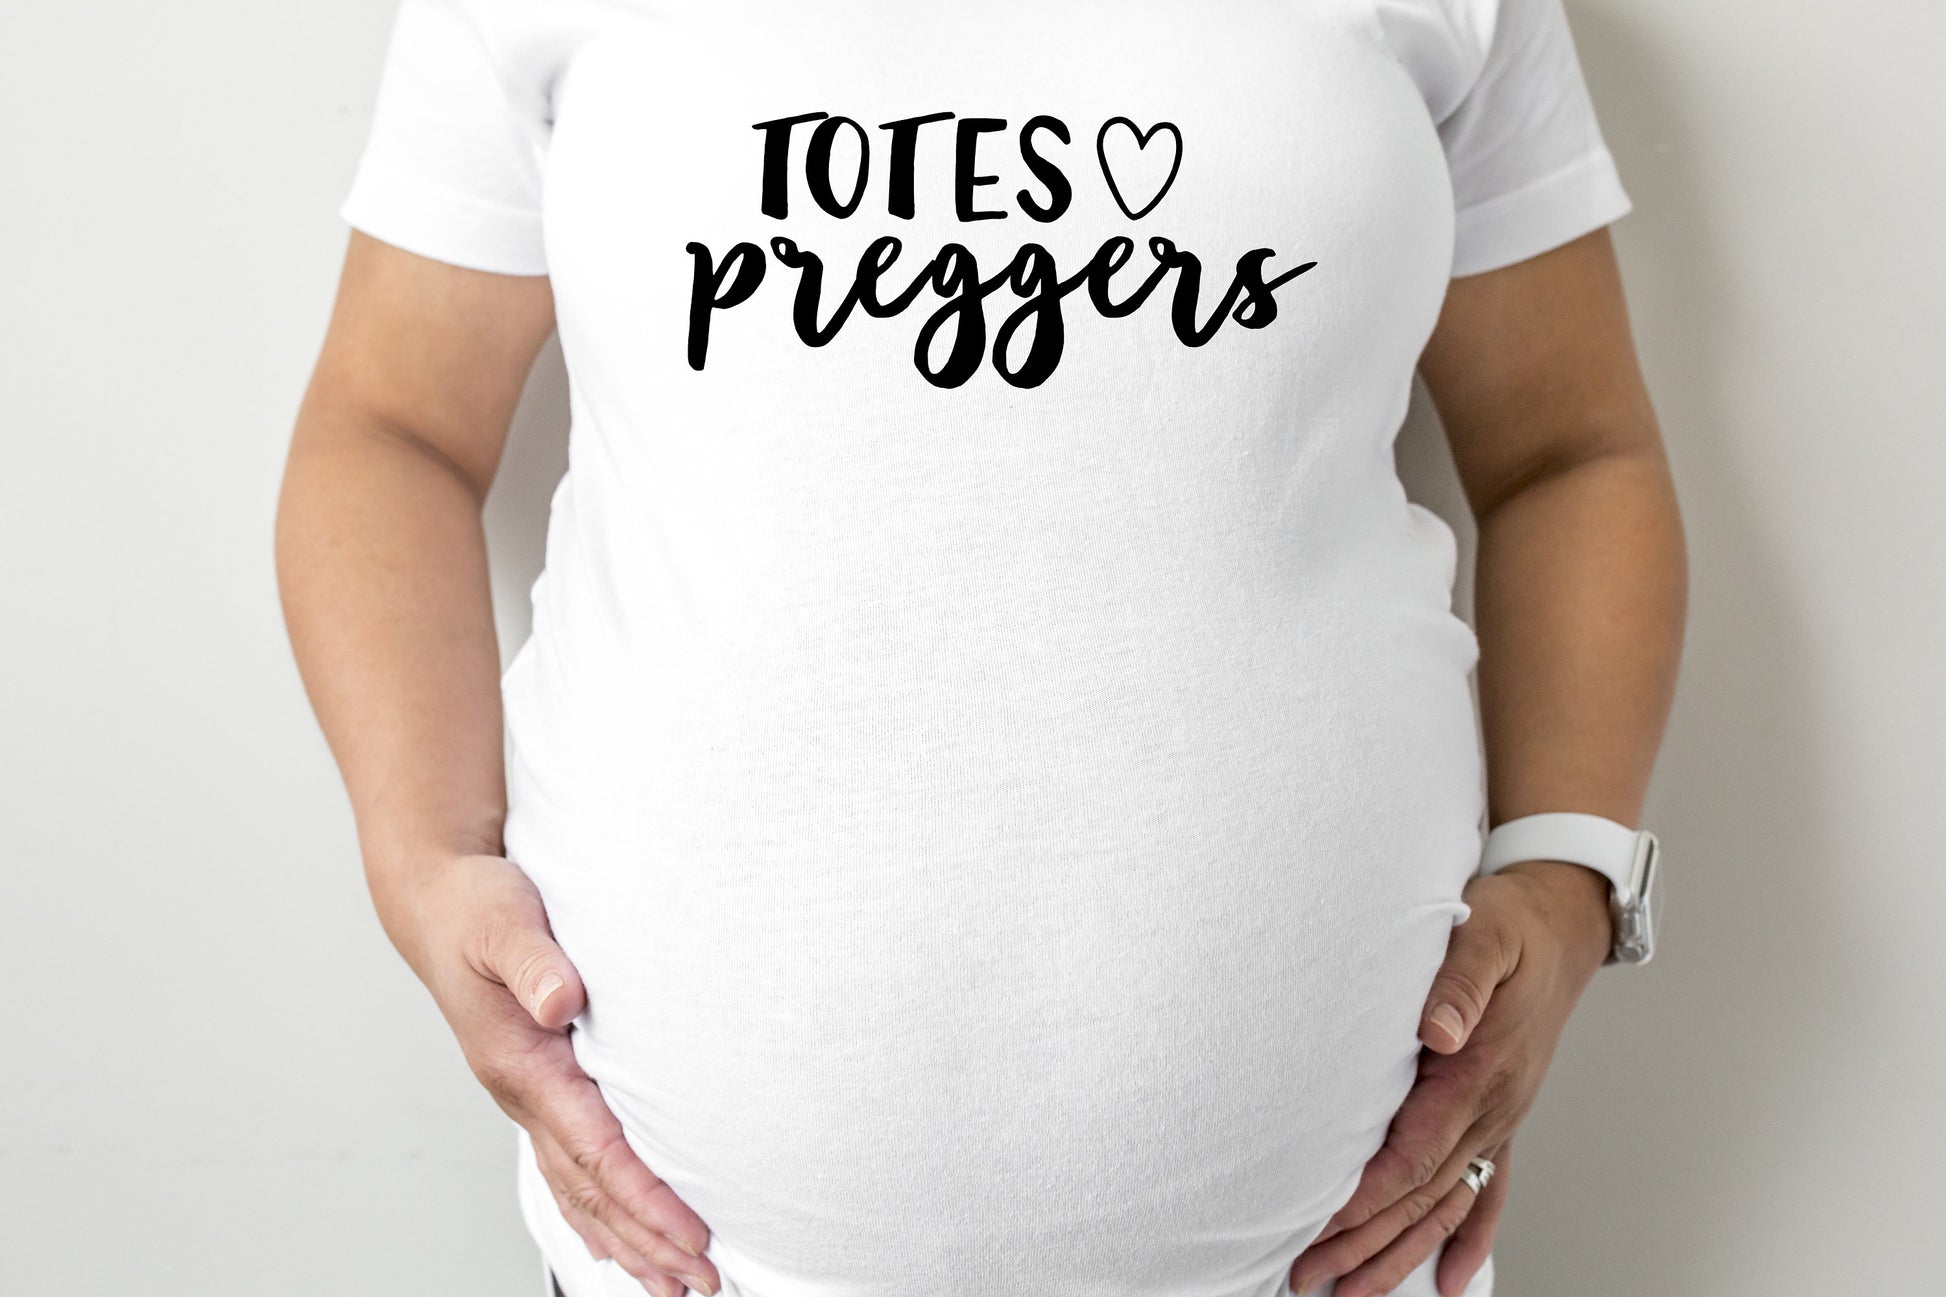 Totes Preggers Maternity T-Shirt - maternity cut shirt with ruched sides - pregnancy announcement - maternity shirt - funny maternity shirt